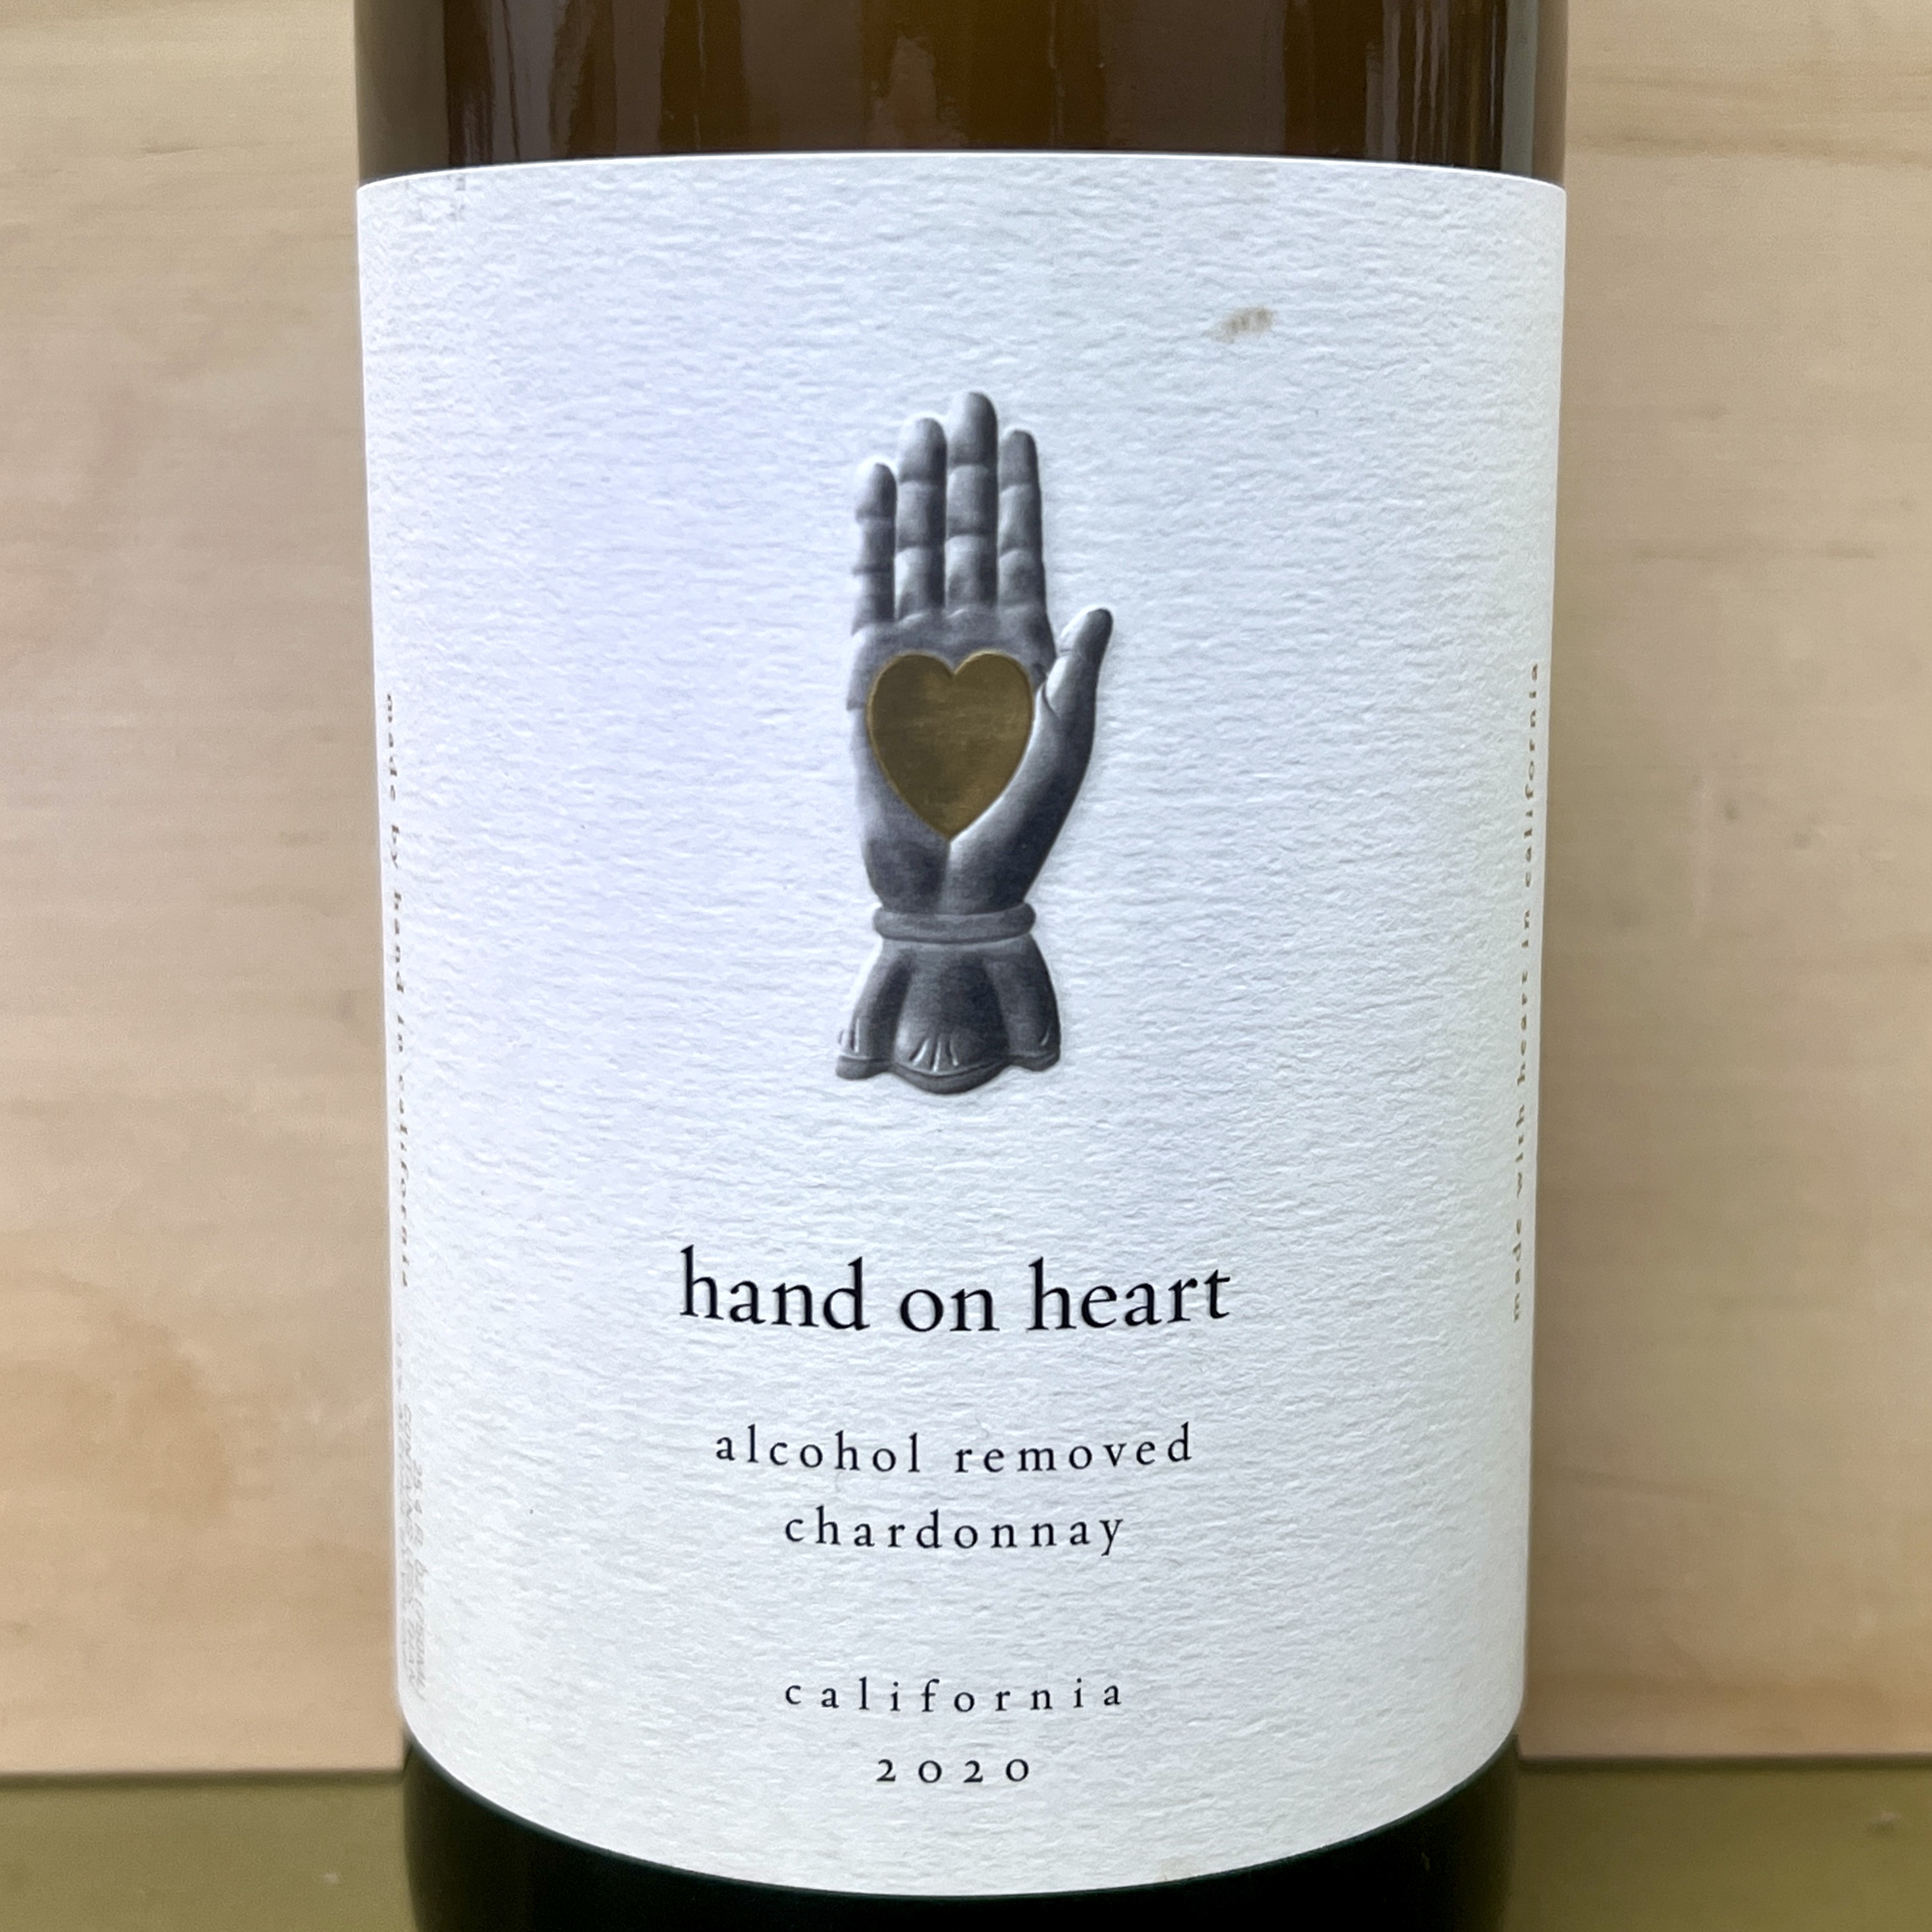 Hand on Heart alcohol removed Chardonnay 2020